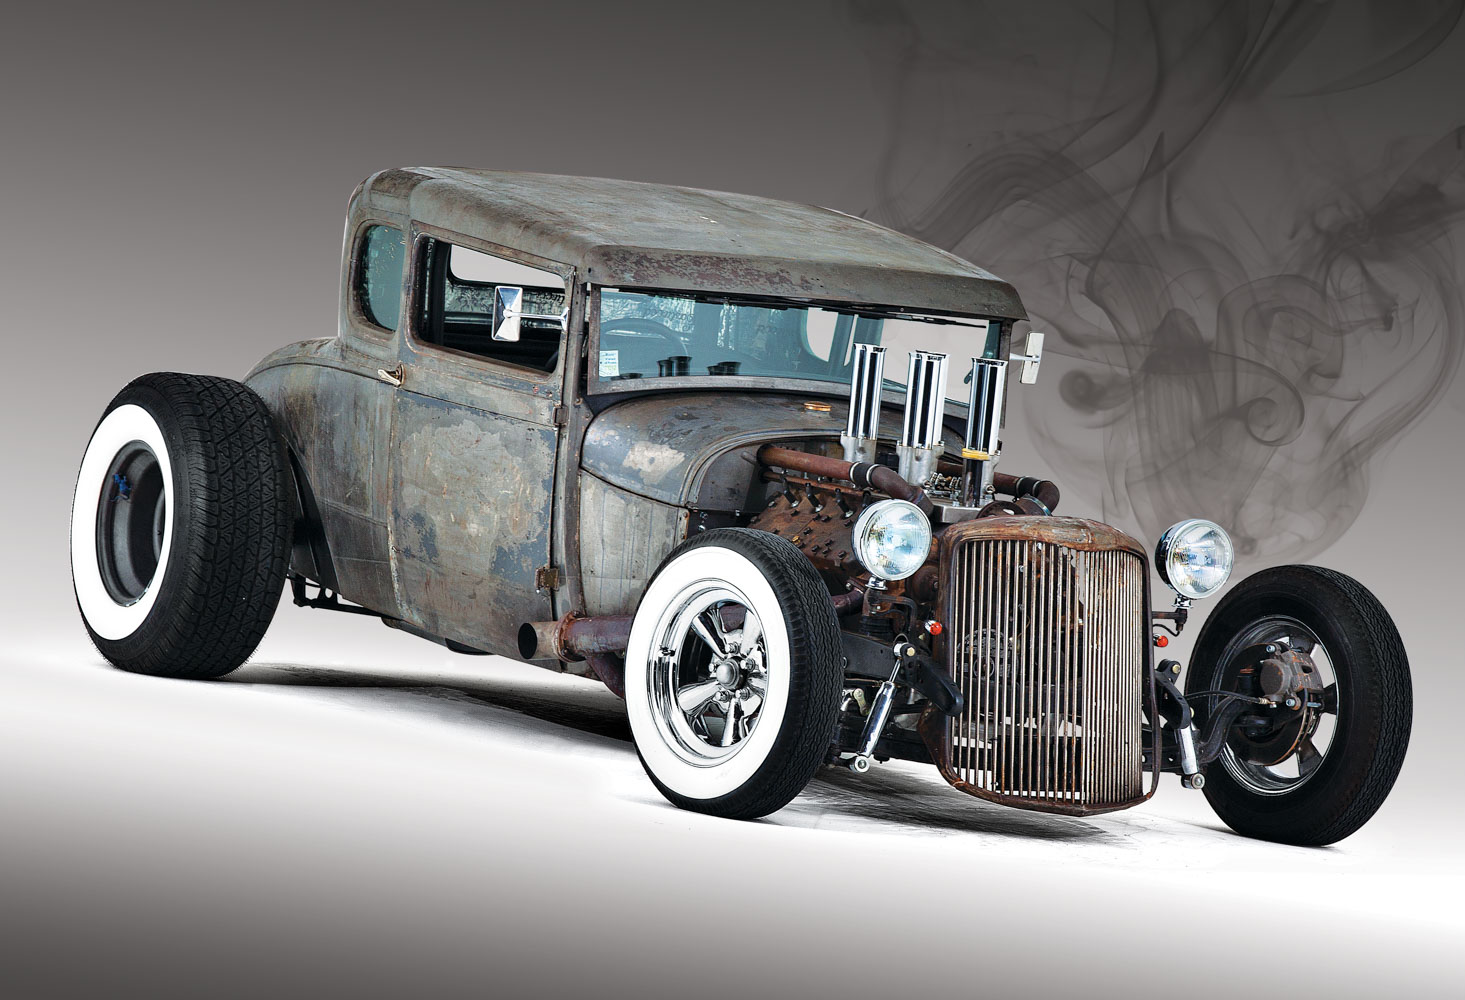 A perfectly imperfect 1928 Ford Rat Rod — The Motorhood